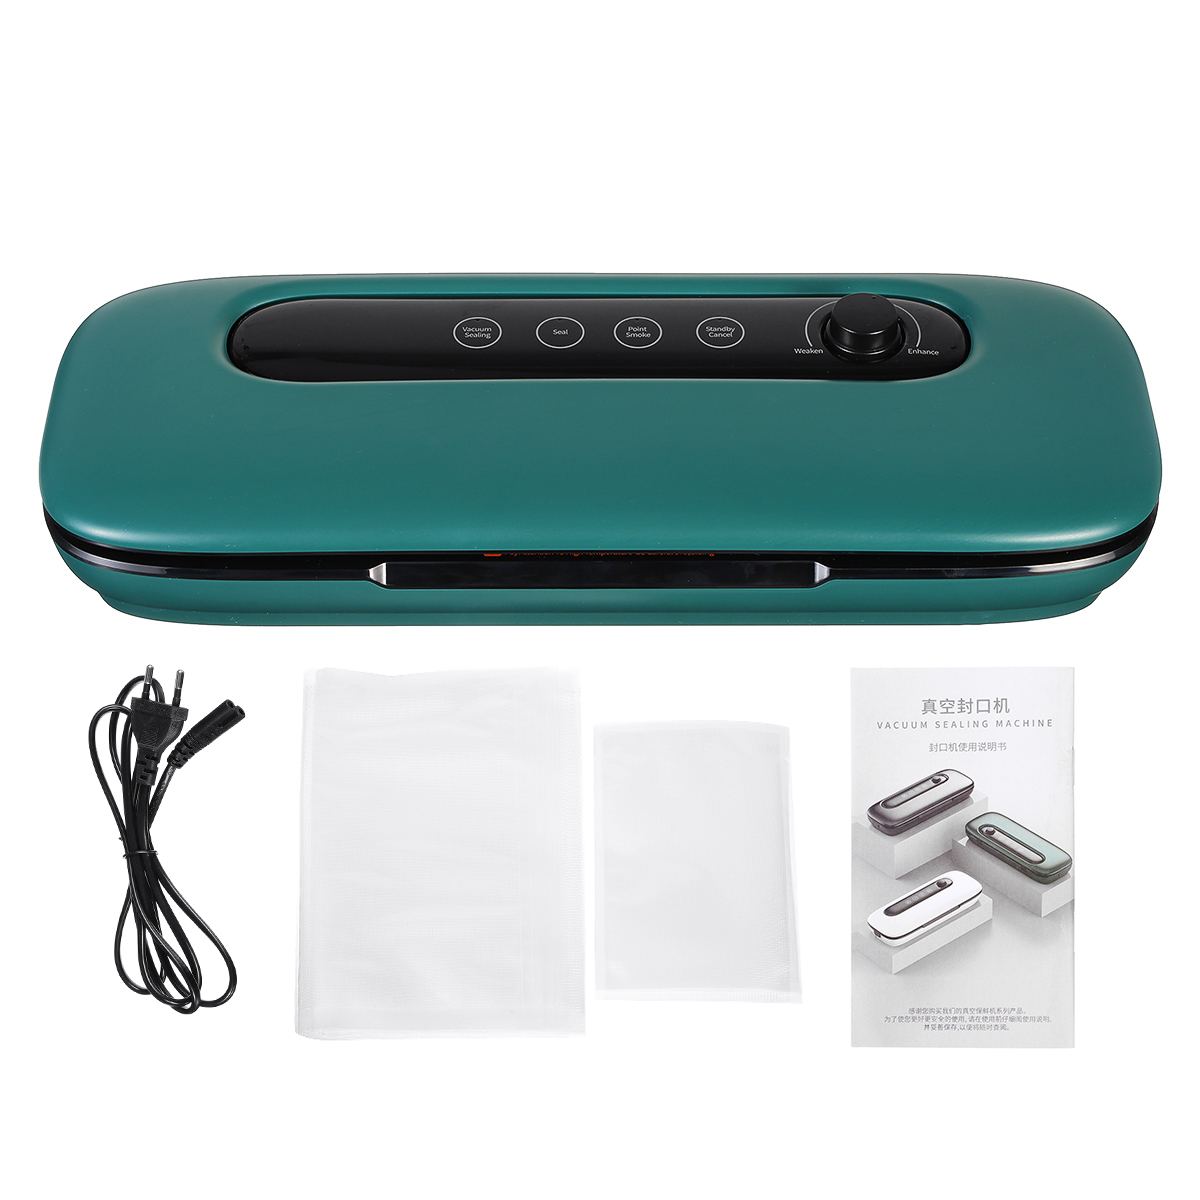 Vacuum-Sealer-Machine-Full-Automatic-Food-Sealer-Air-Sealing-System-for-Food-Storage-3-Functions-Ove-1928369-17